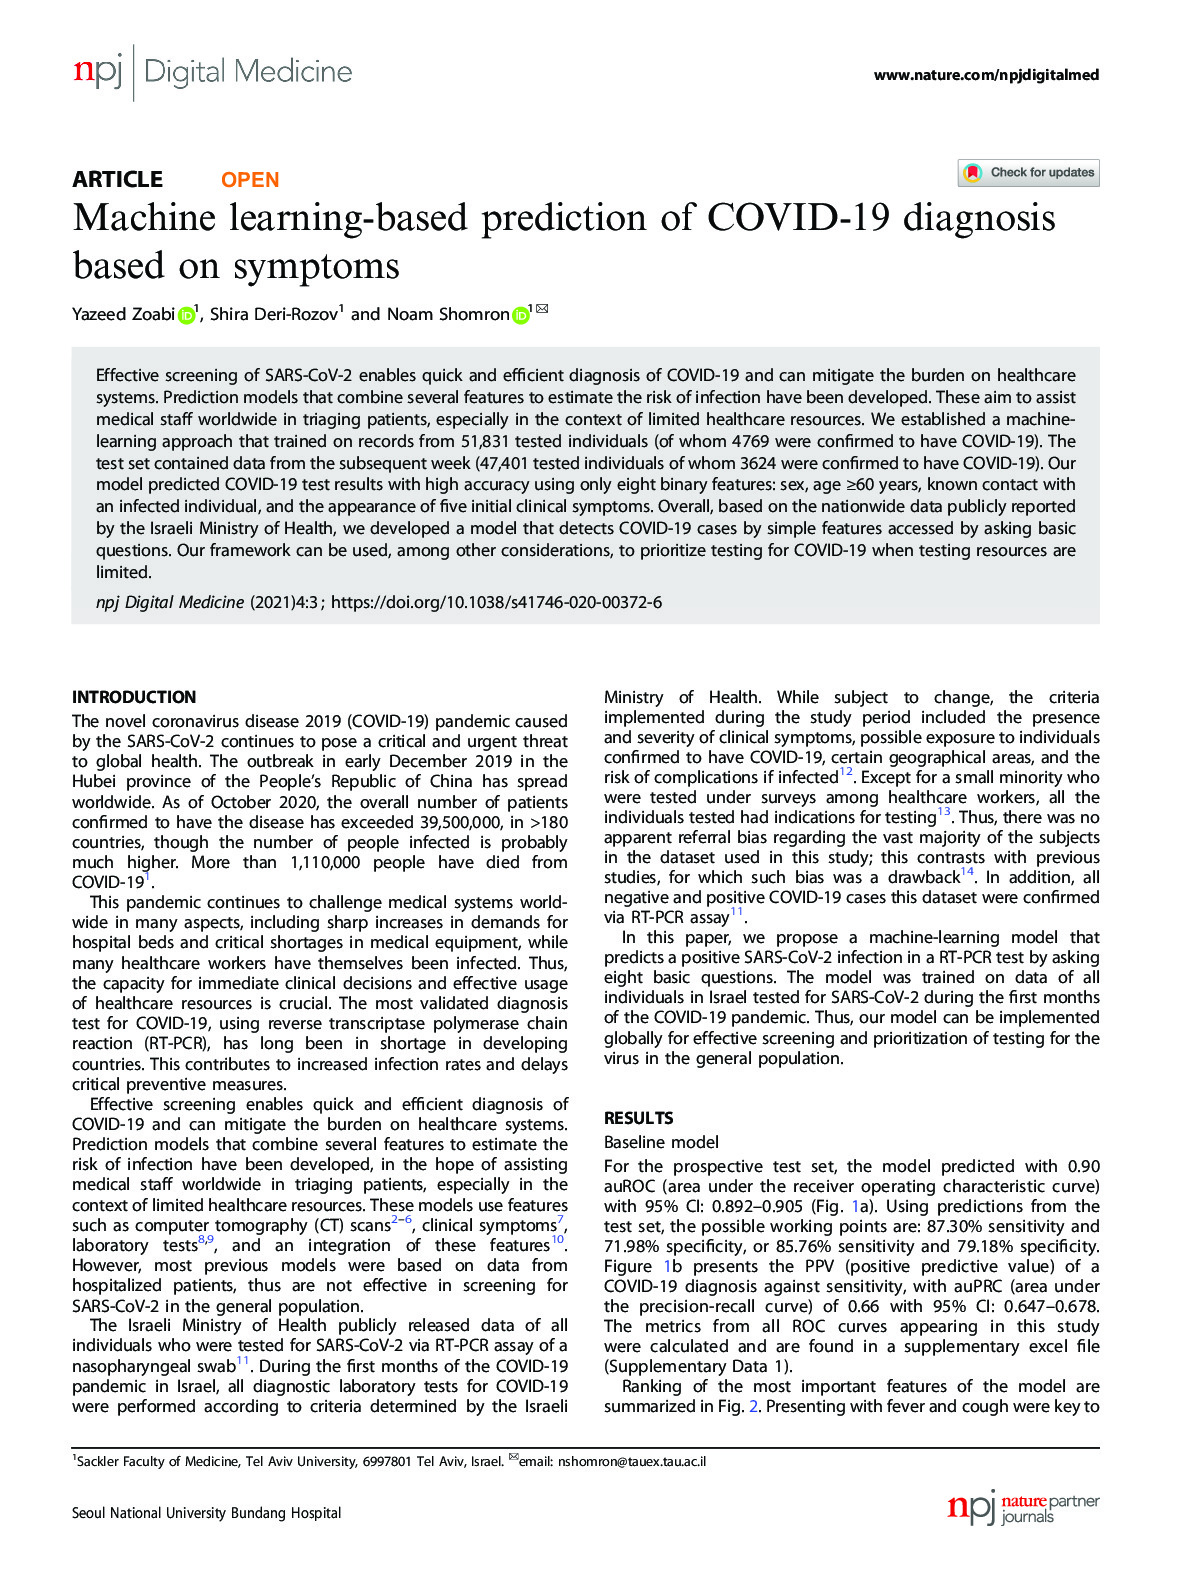 Machine learning-based prediction of COVID-19 diagnosis based on symptoms – 41746_2020_Article_372